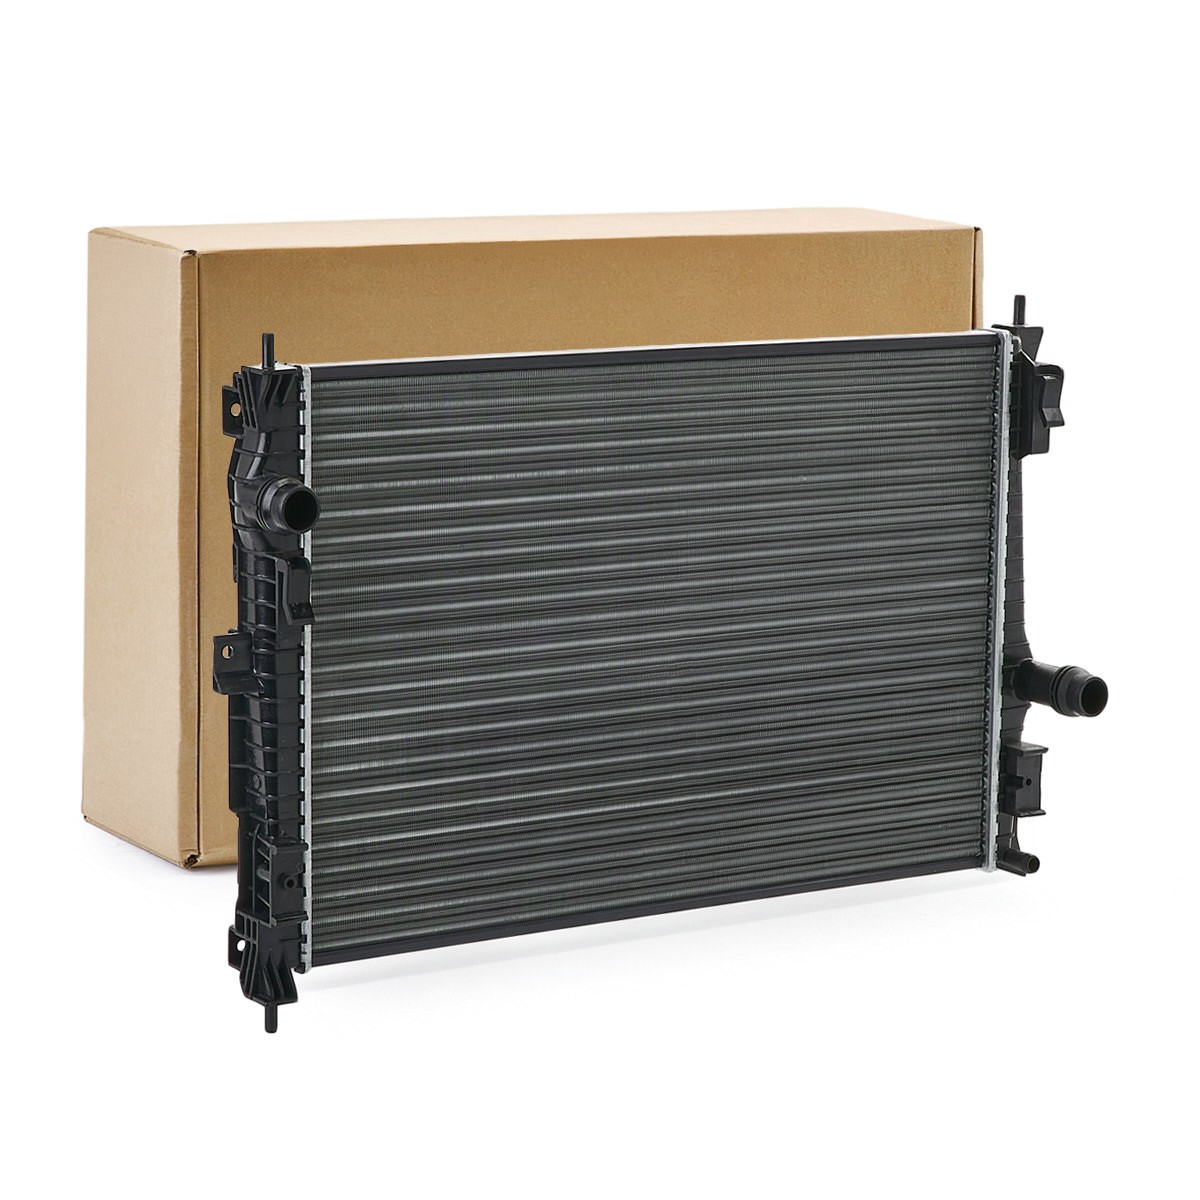 RIDEX 470R0893 Engine radiator Aluminium, 650 x 433 x 18 mm, Mechanically jointed cooling fins